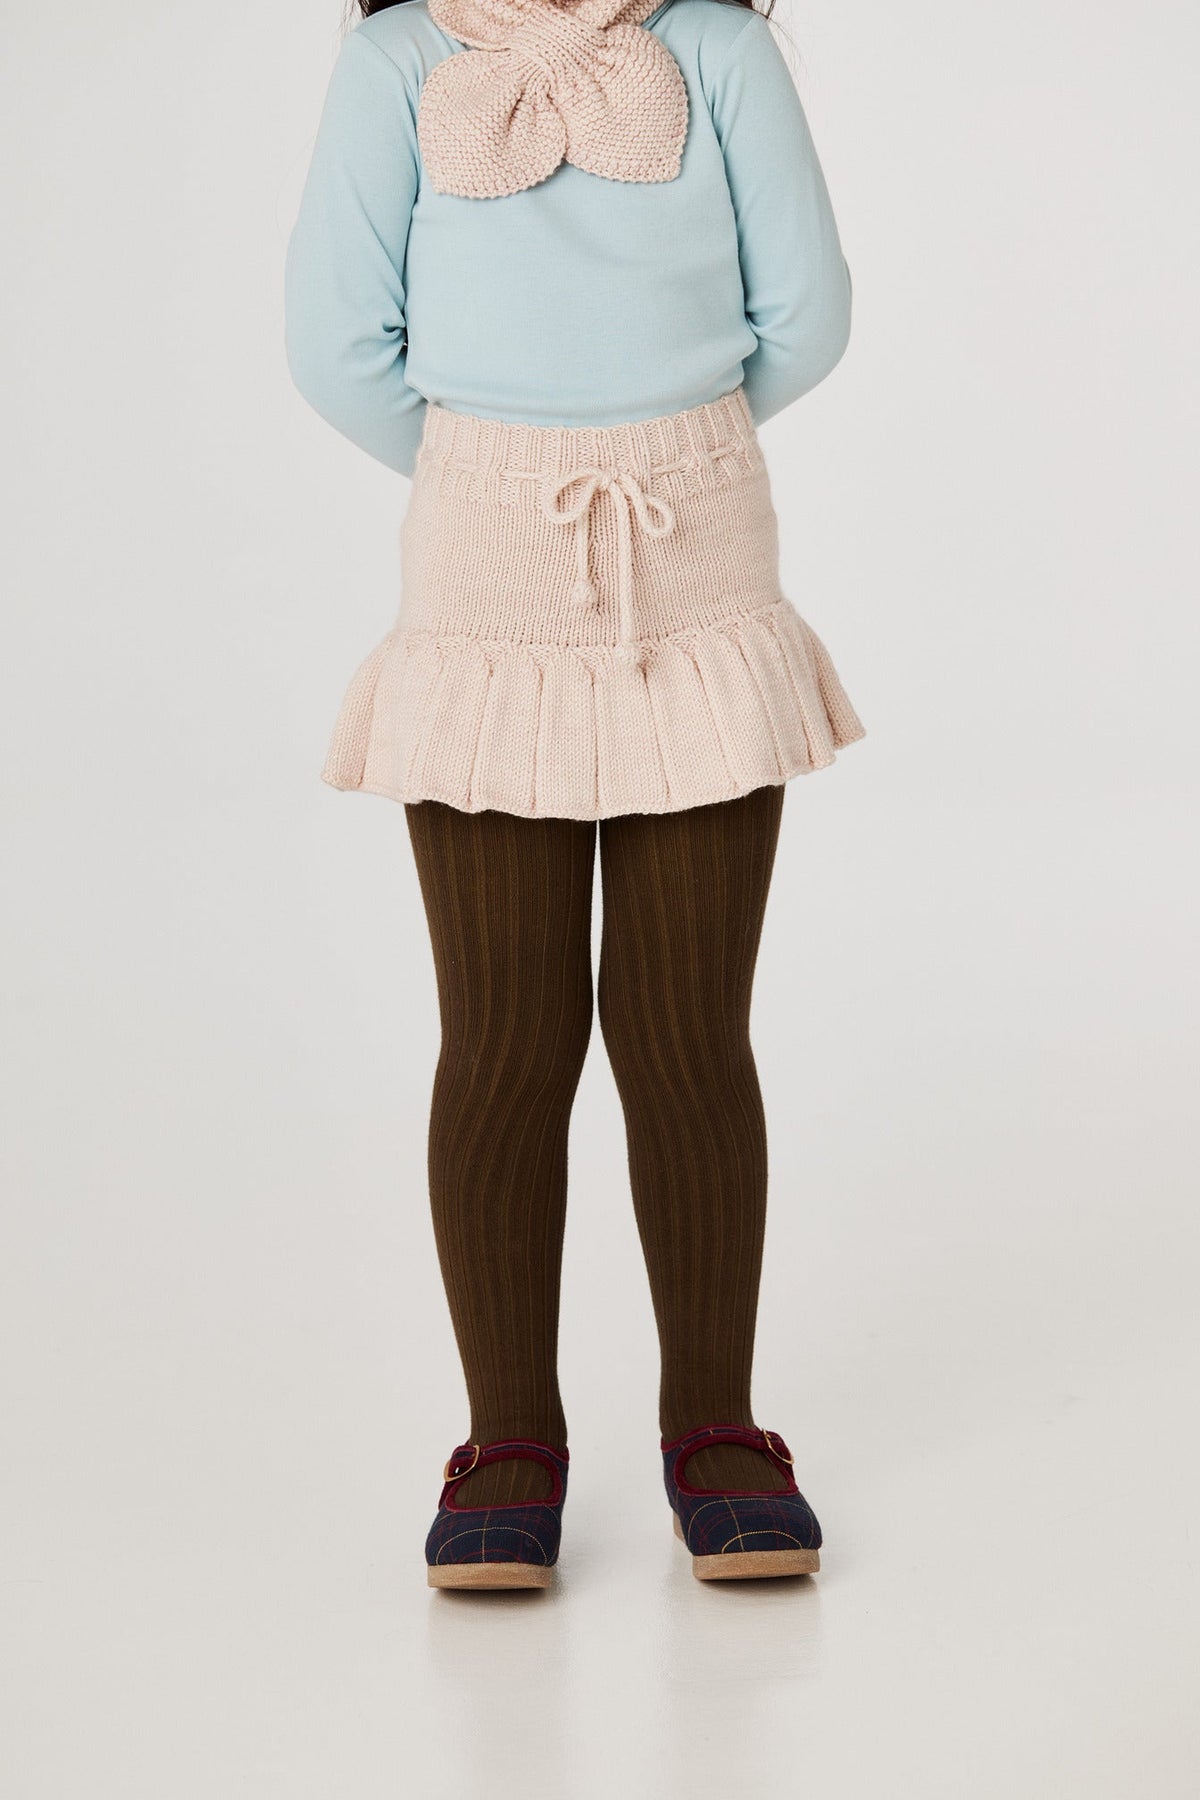 Skating Pond Skirt - Dune+Model is 41 inches tall, 38lbs, wearing a size 4-5y